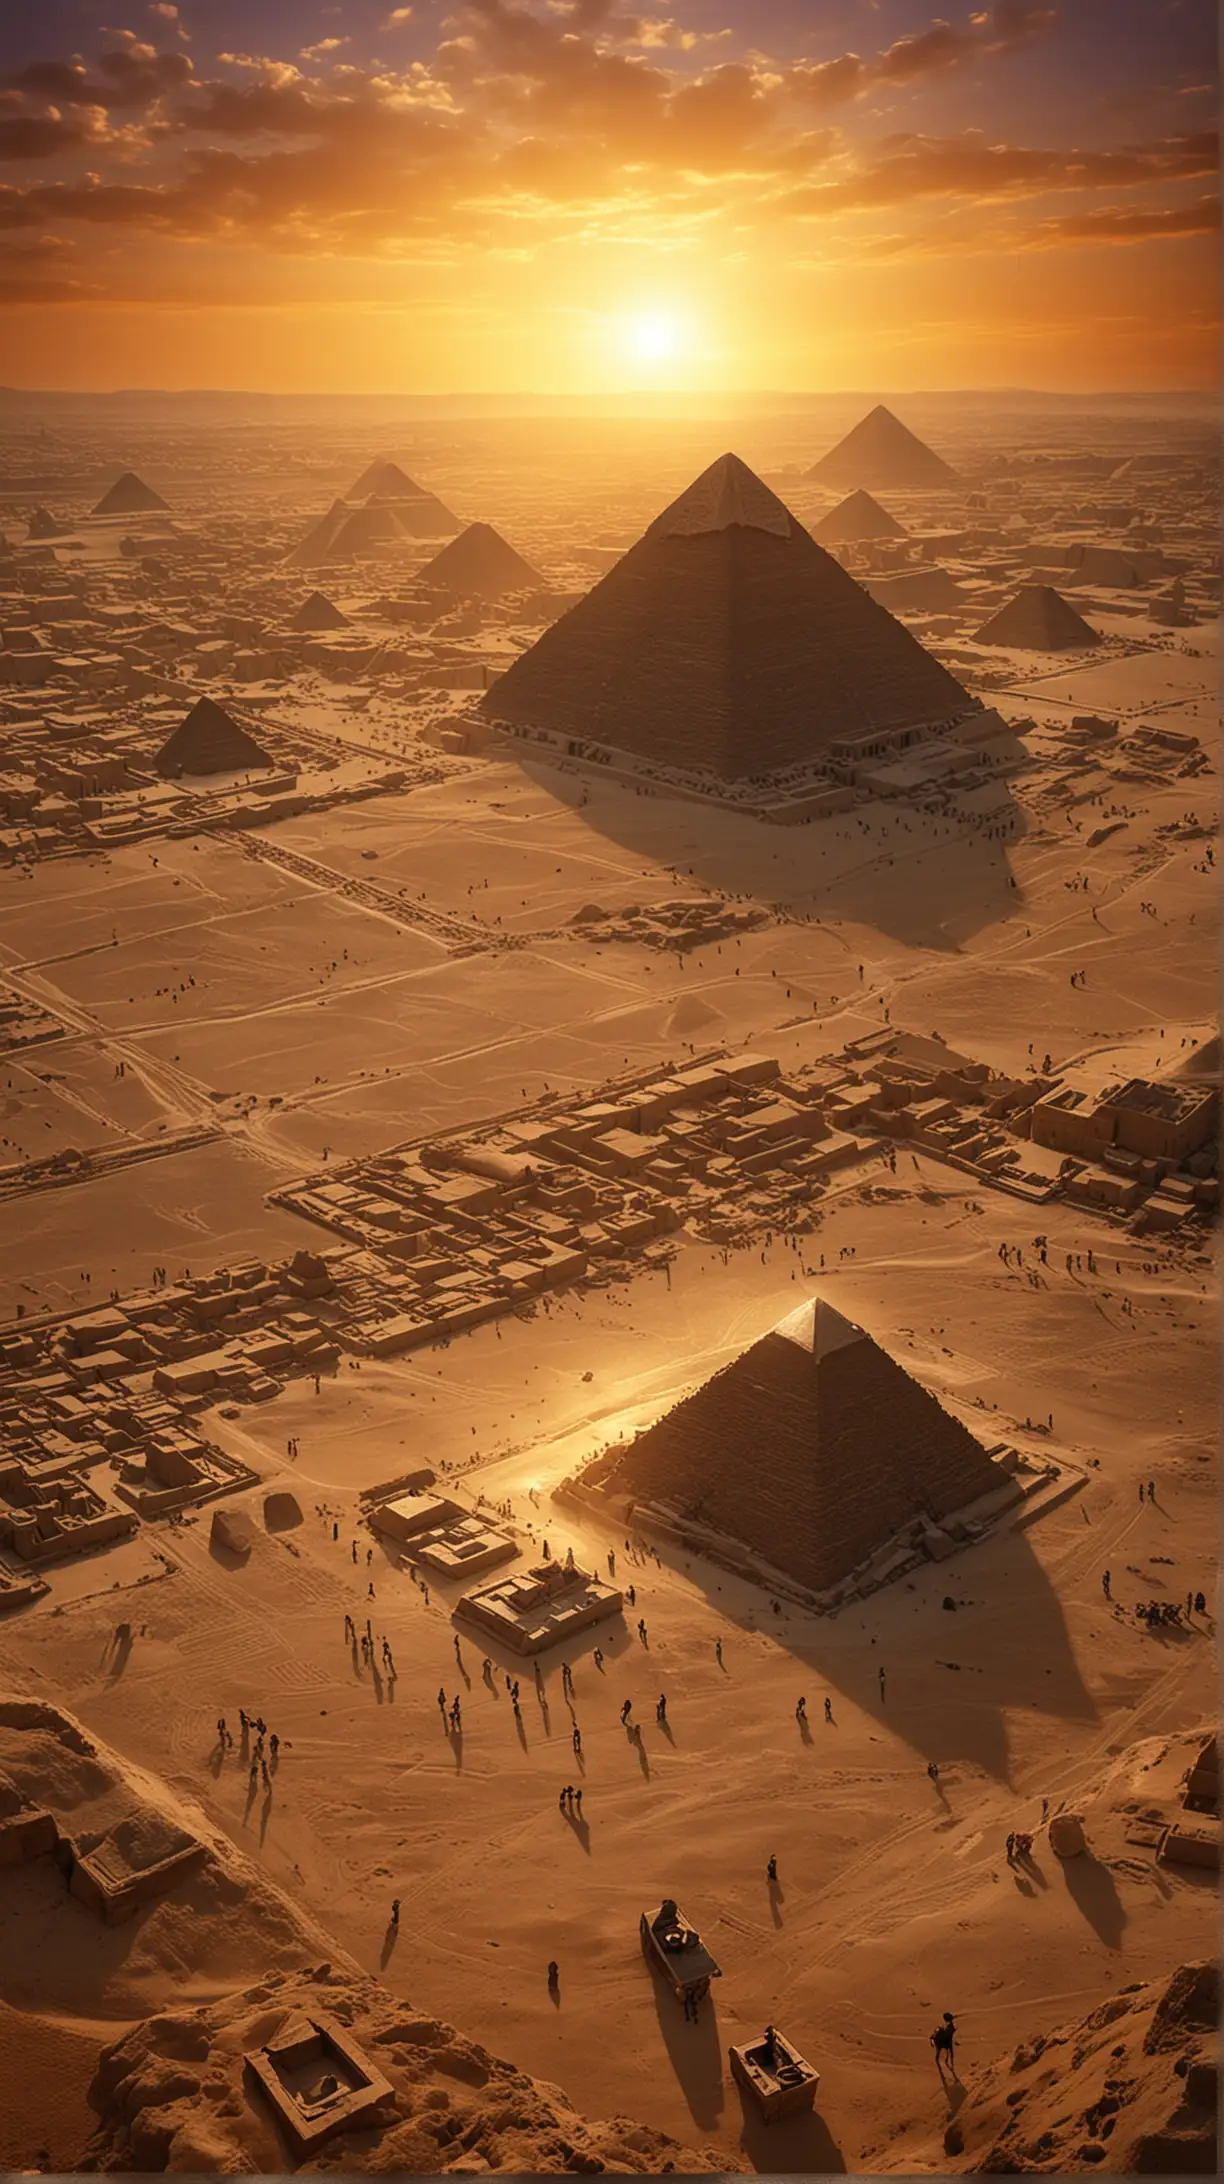 Background: Use a dramatic sunset over the Giza plateau with the Great Pyramid of Giza prominently featured. The sky should have a gradient of deep orange to purple, casting long shadows over the pyramids.

Pyramids: Highlight the three main pyramids (Khufu, Khafre, and Menkaure) with the Great Pyramid (Khufu) in the center, slightly larger than the others. Add subtle glowing lines indicating the precise alignment with the cardinal points.

Foreground Elements:

Hieroglyphs: Include faint hieroglyphic symbols around the edges of the cover, glowing slightly to add a mystical effect.
Artifacts: Place an ancient Egyptian artifact, like an ankh or a scarab beetle, in the bottom corner to hint at the archaeological aspect.
Energy Field: Add a faint, glowing aura or energy field emanating from the apex of the Great Pyramid to suggest the idea of hidden energies or ancient technology.
Archaeologists: Small silhouettes of archaeologists working near the base of the pyramids, adding a sense of exploration and discovery.
Ancient Scripts: Include fragments of ancient scripts or maps in the background, partially obscured to add depth and interest.
Visual Effects:

Use light rays and a slight vignette effect to focus the viewer's attention on the center of the cover.
Add a texture overlay to give the cover an aged, ancient look, like a parchment or stone tablet.